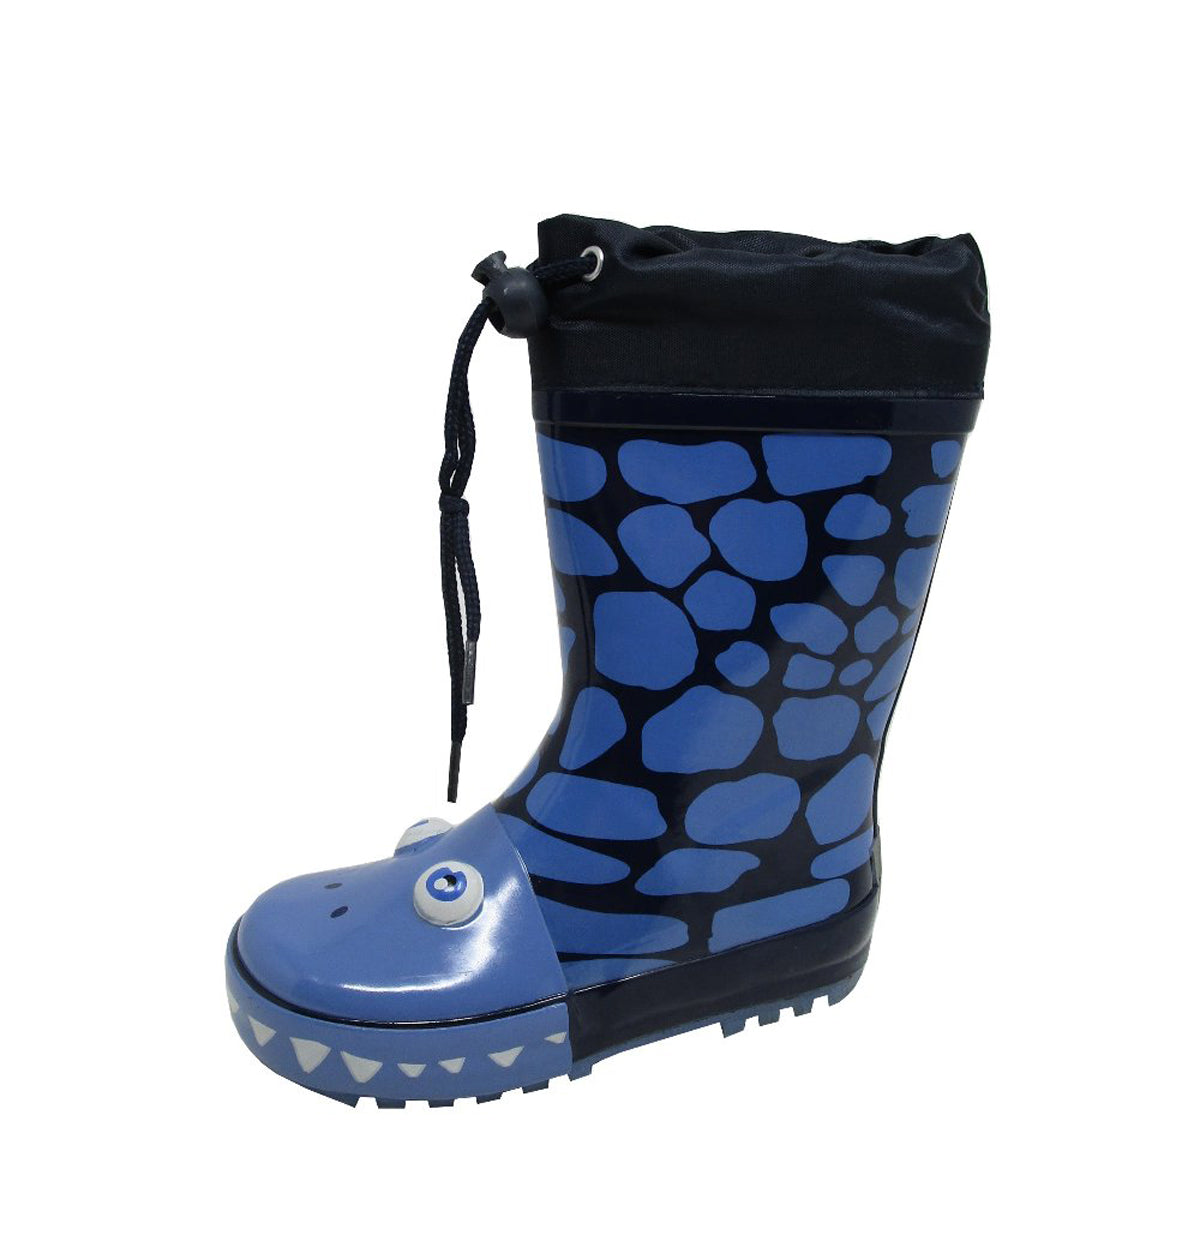 Childrens wellingtons boots with drawstring top